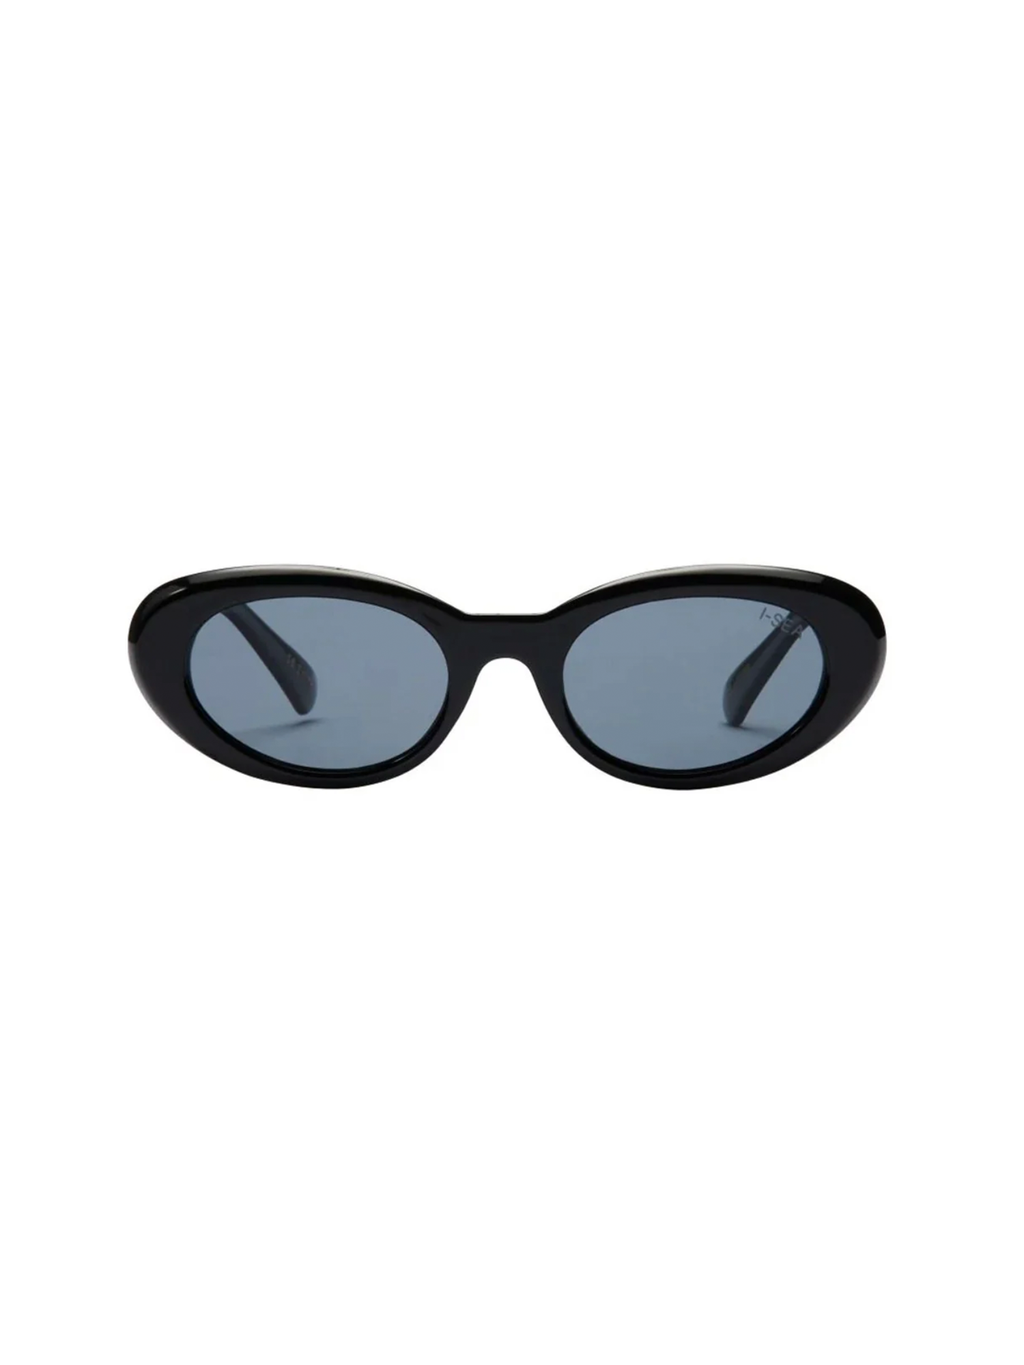 Jagger Sunnies in Onyx/Smoke - Stitch And Feather